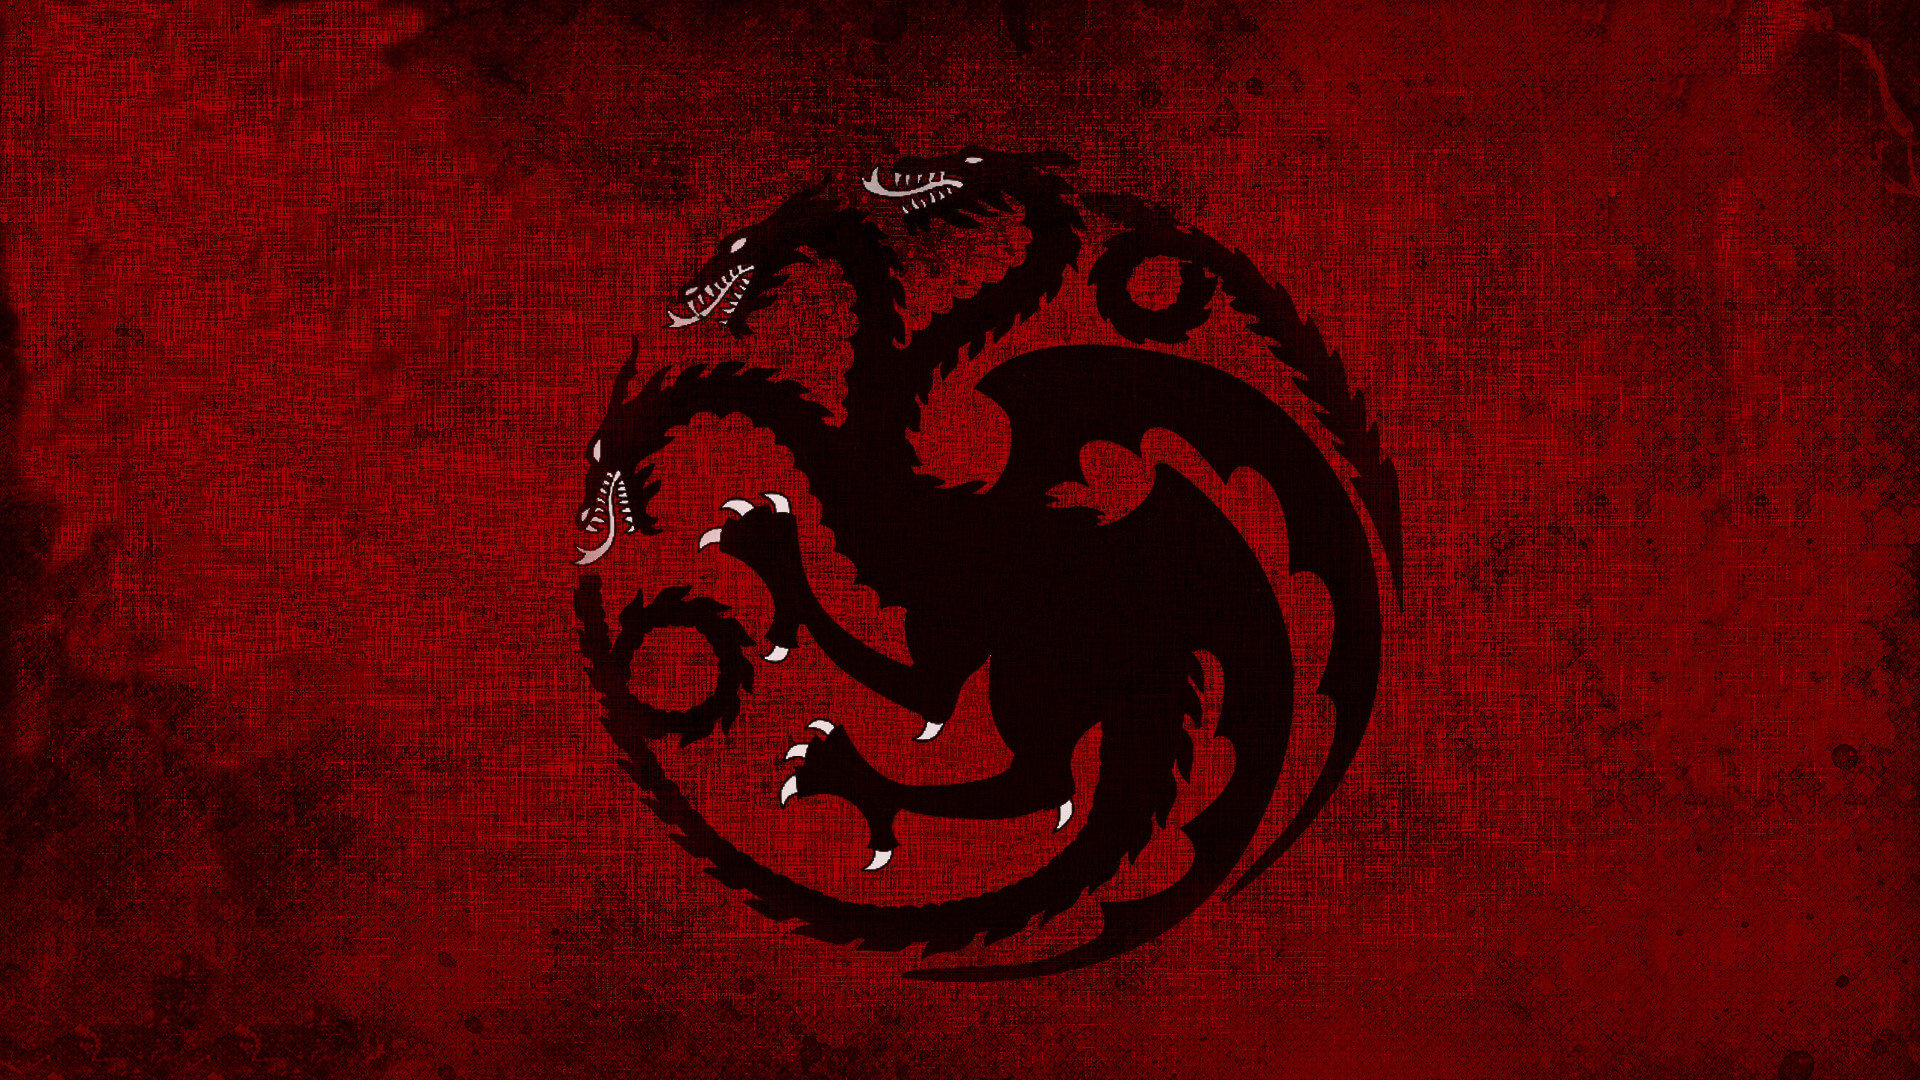 Game of Thrones prequel house of the dragon